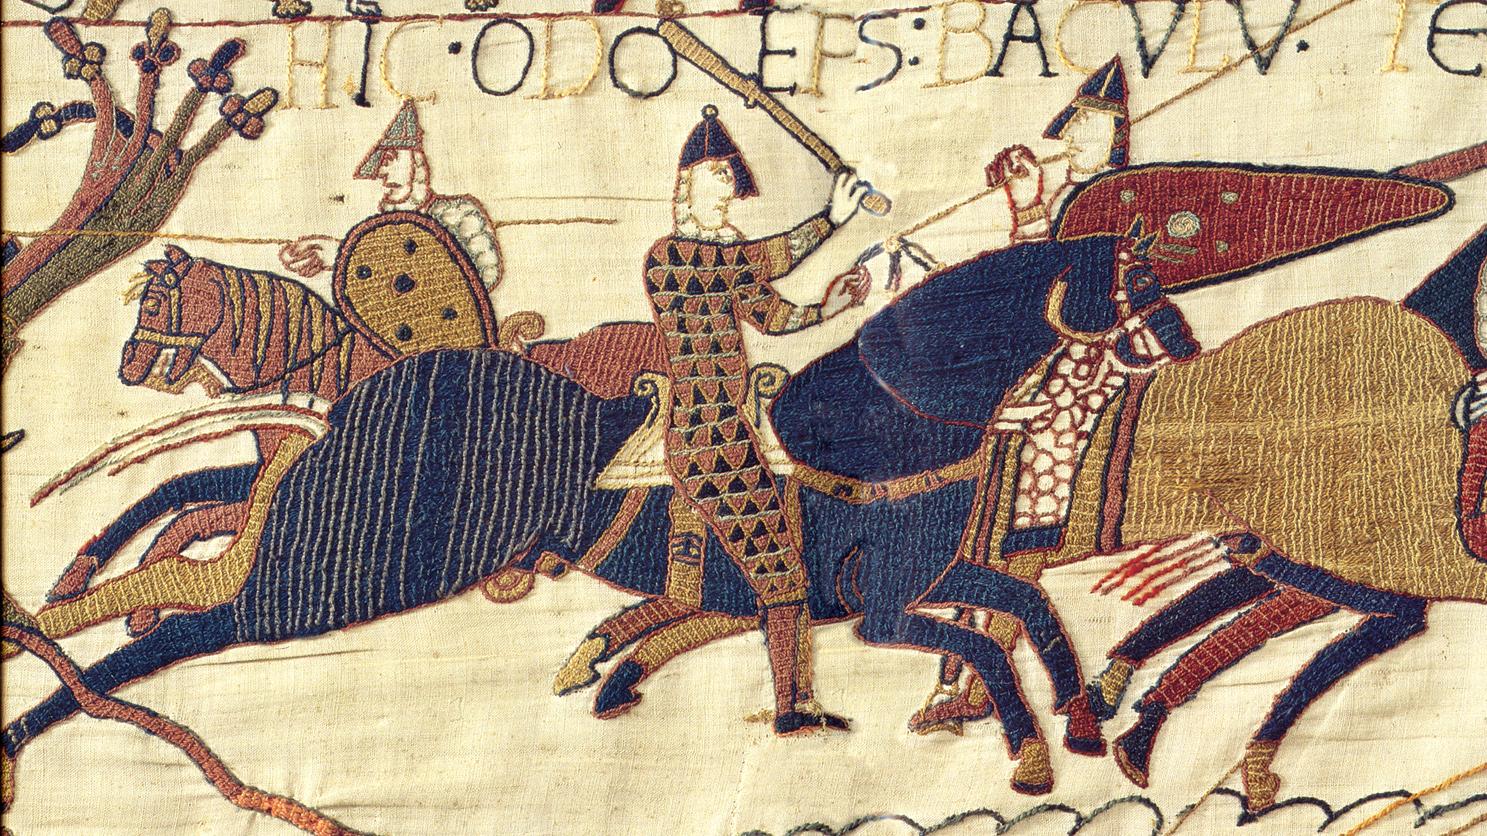 A section of the Bayeux Tapestry depicting a scene in the decisive Battle of Hastings in 1066